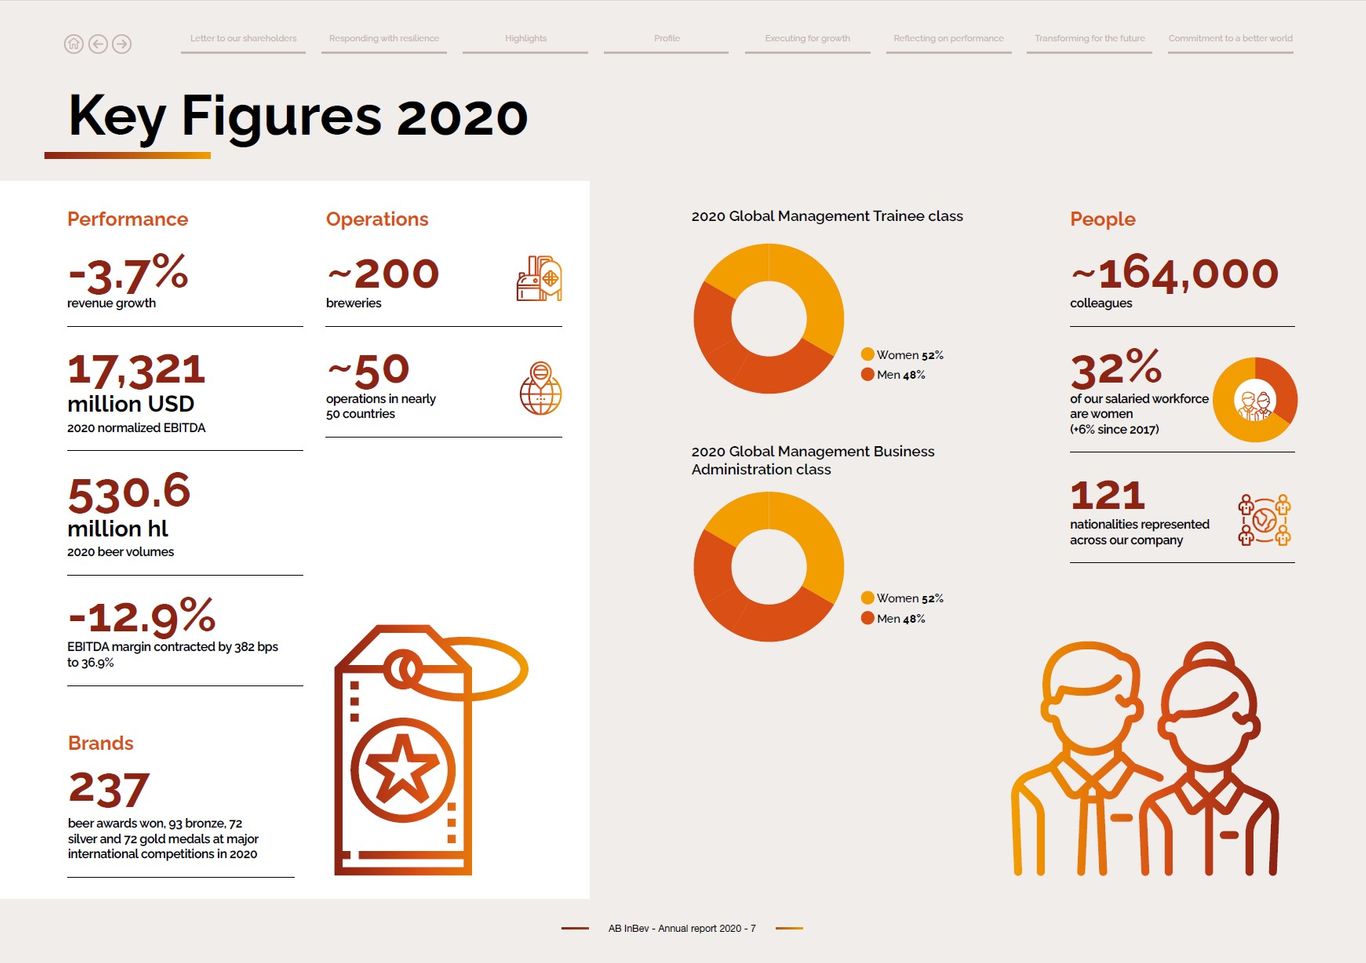 Screenshot from AB InBev's Annual Report 2020